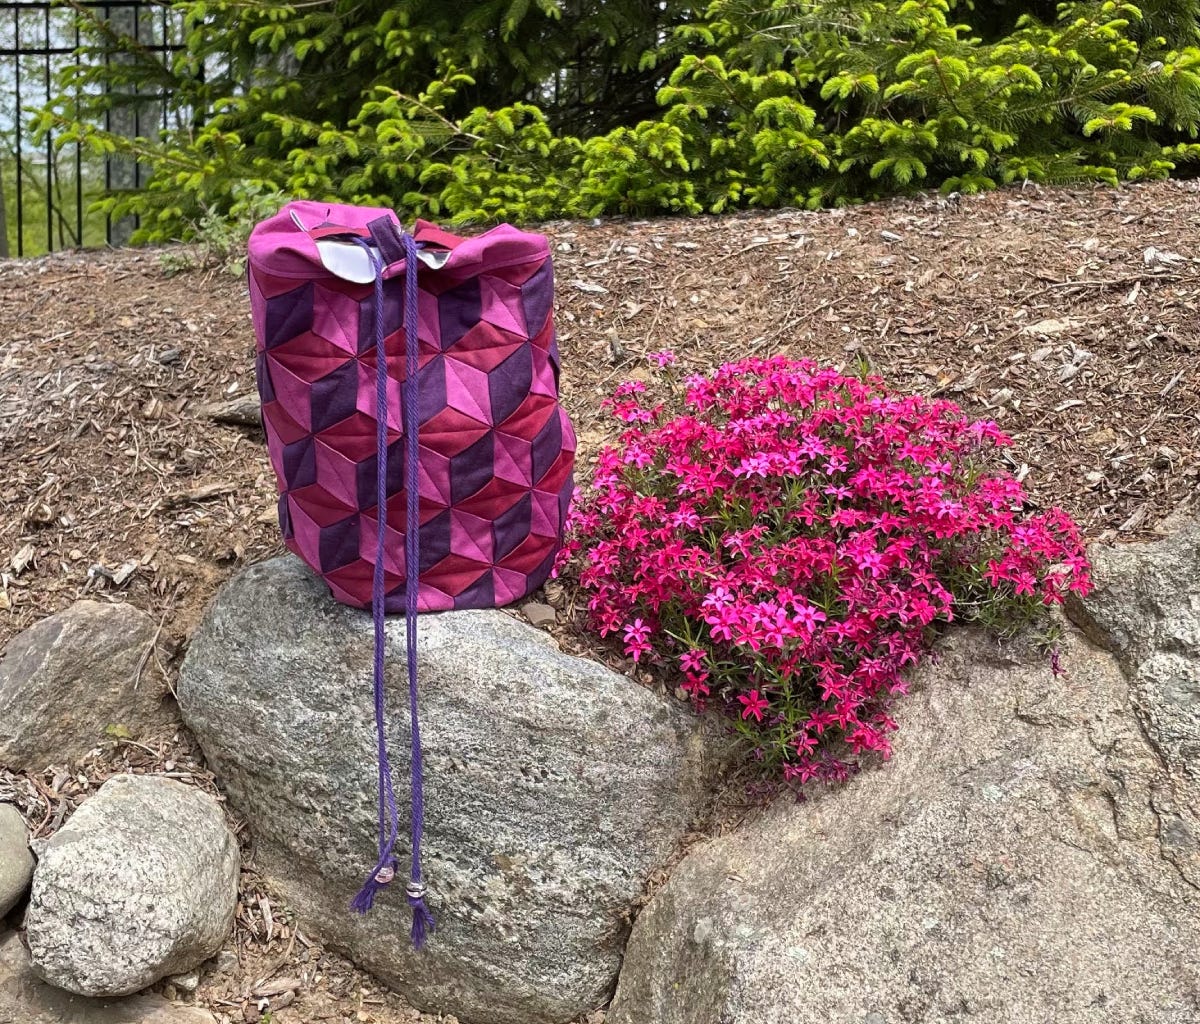 Jen's Finished Weaved Drawstring Bucket Bag Pictured with Flowers